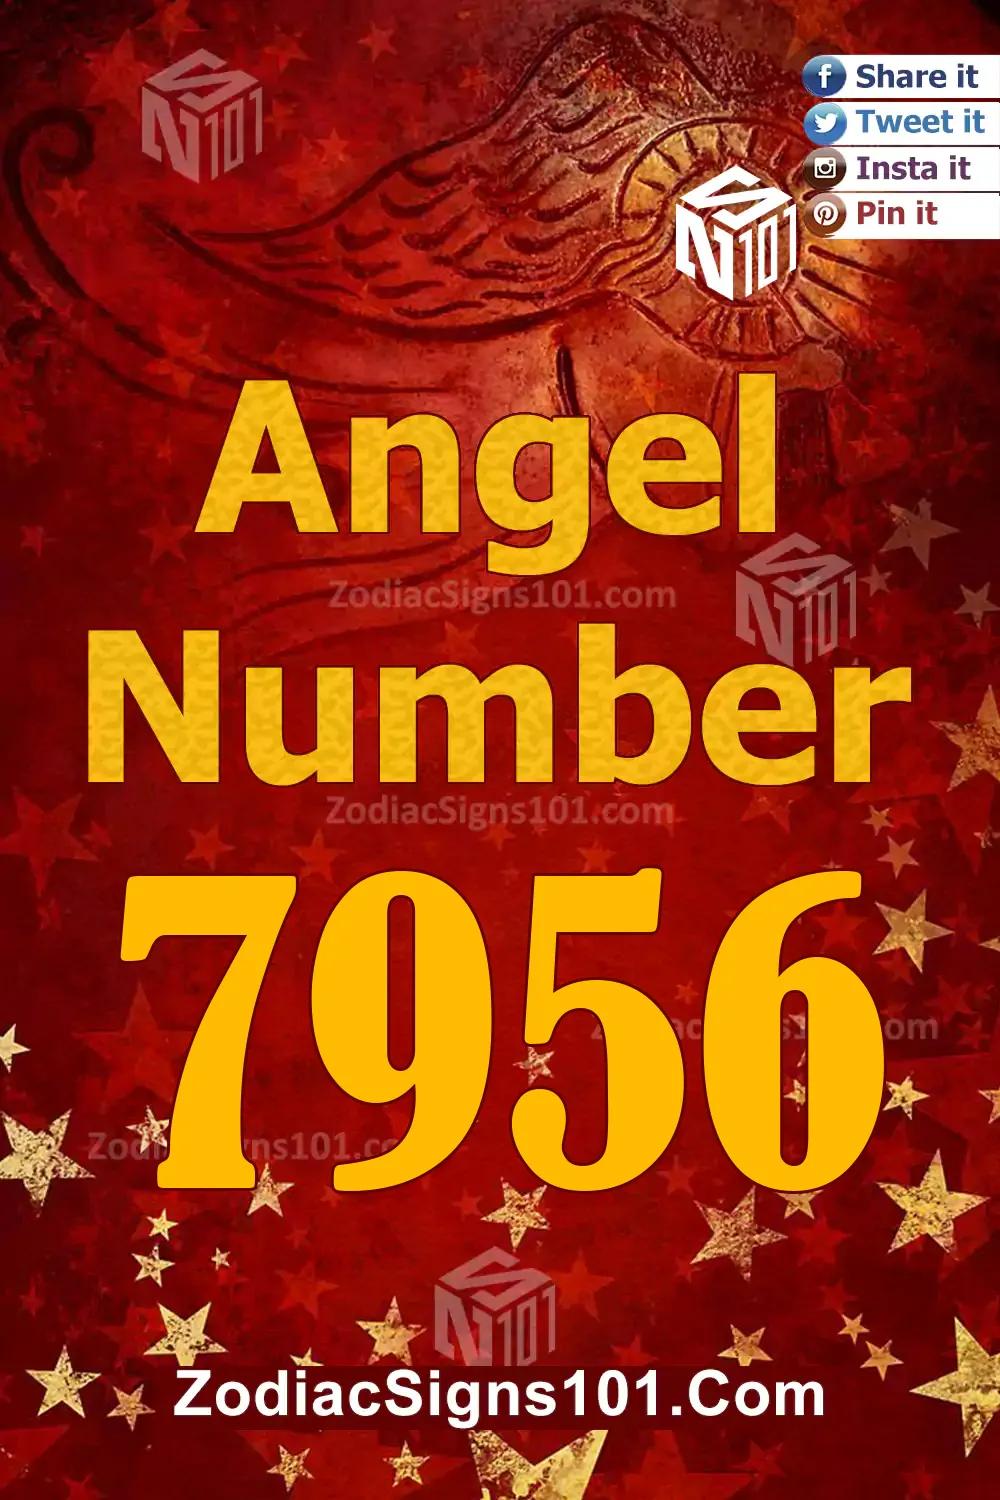 7956 Angel Number Meaning